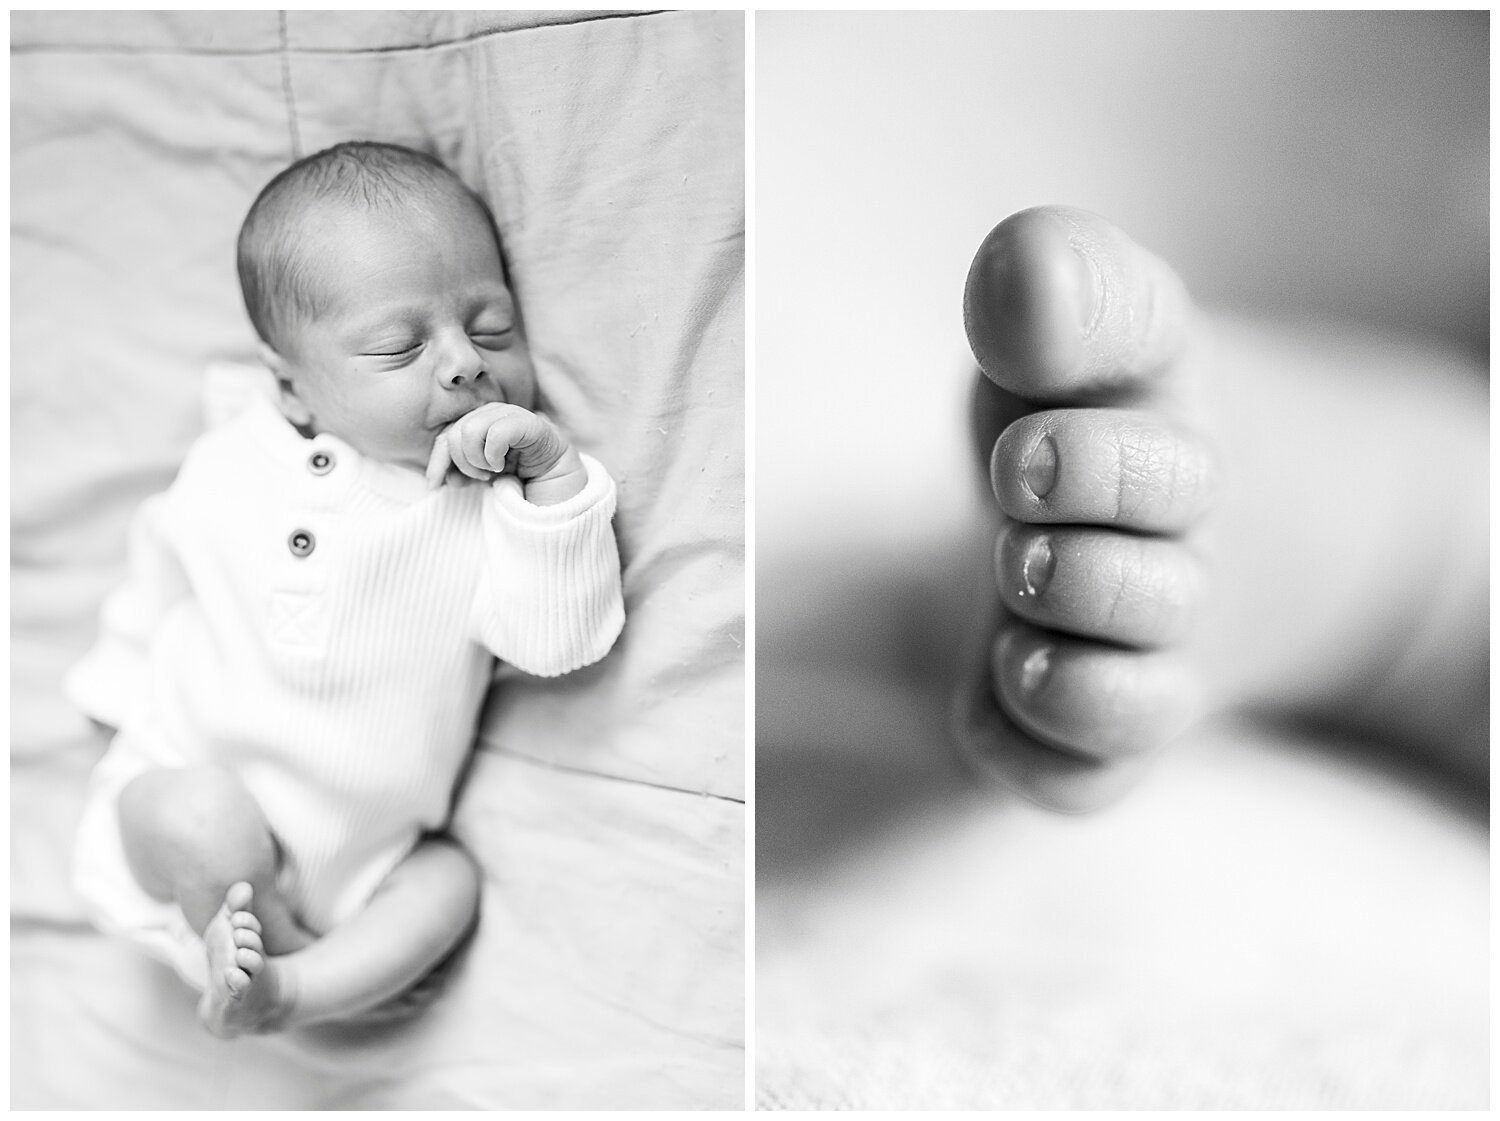 New-Jersey-Newborn-Photography-Lifestyle-In-Home-Session-Photographer-Apollo-Fields-02.jpg